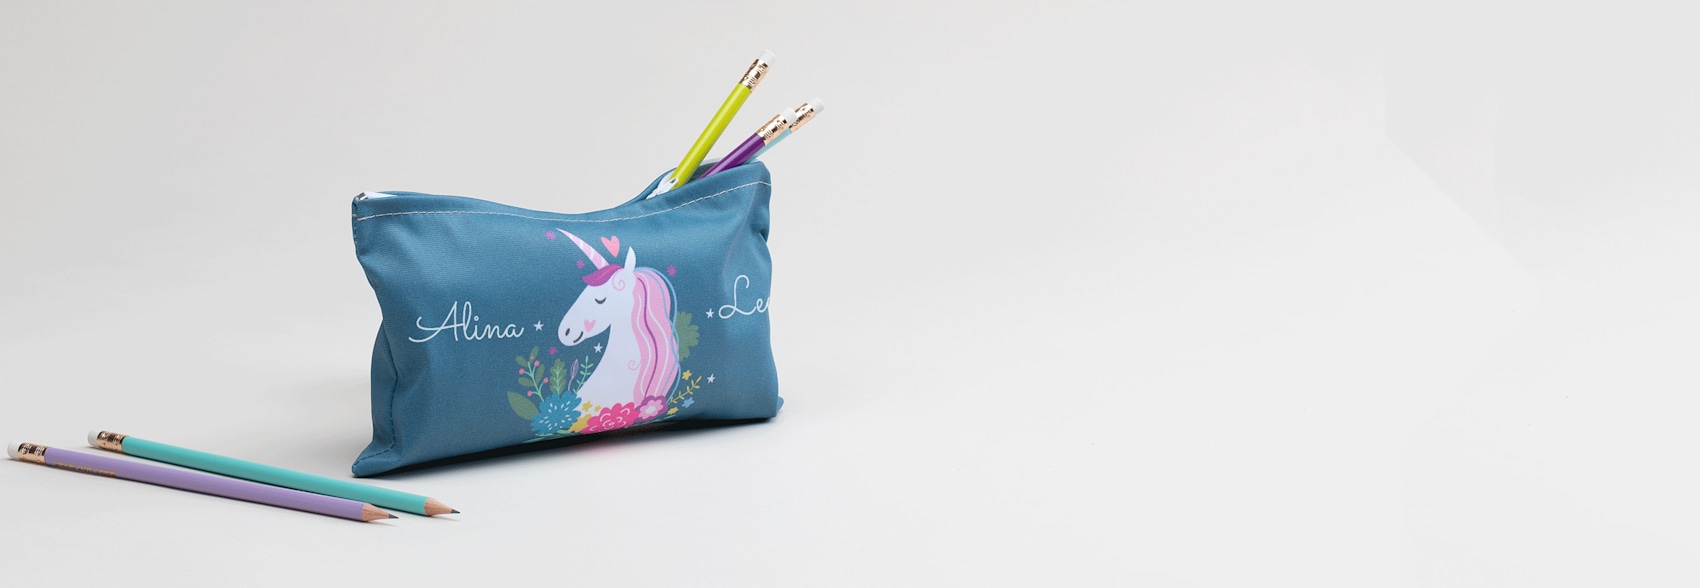 Personalised Printed Pencil Case With Stationary 